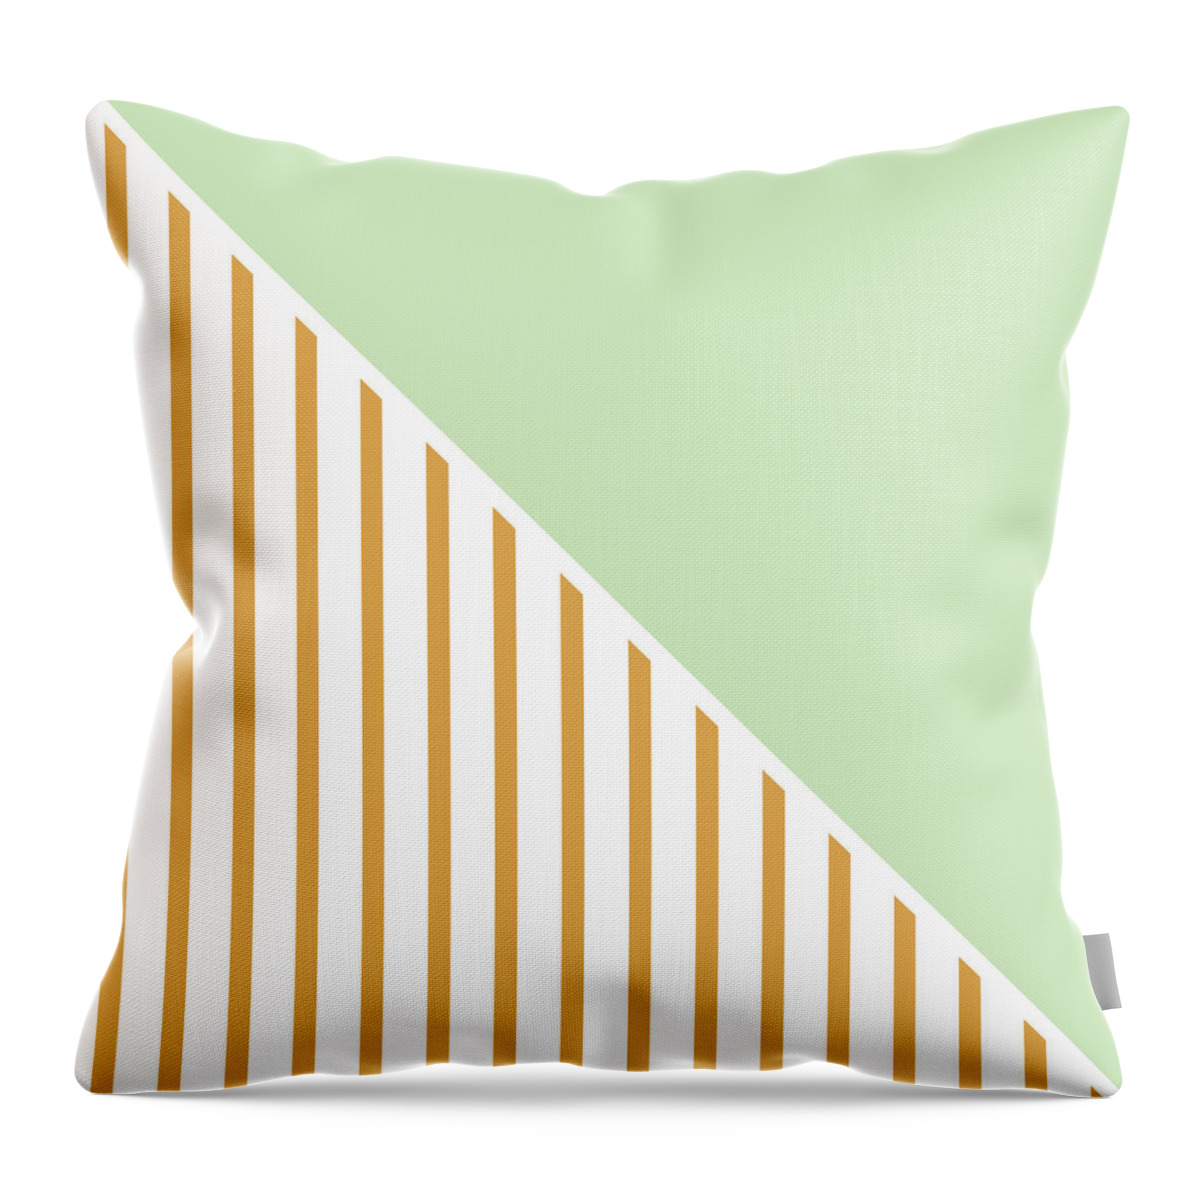 Mint Throw Pillow featuring the digital art Mint and Gold Geometric by Linda Woods